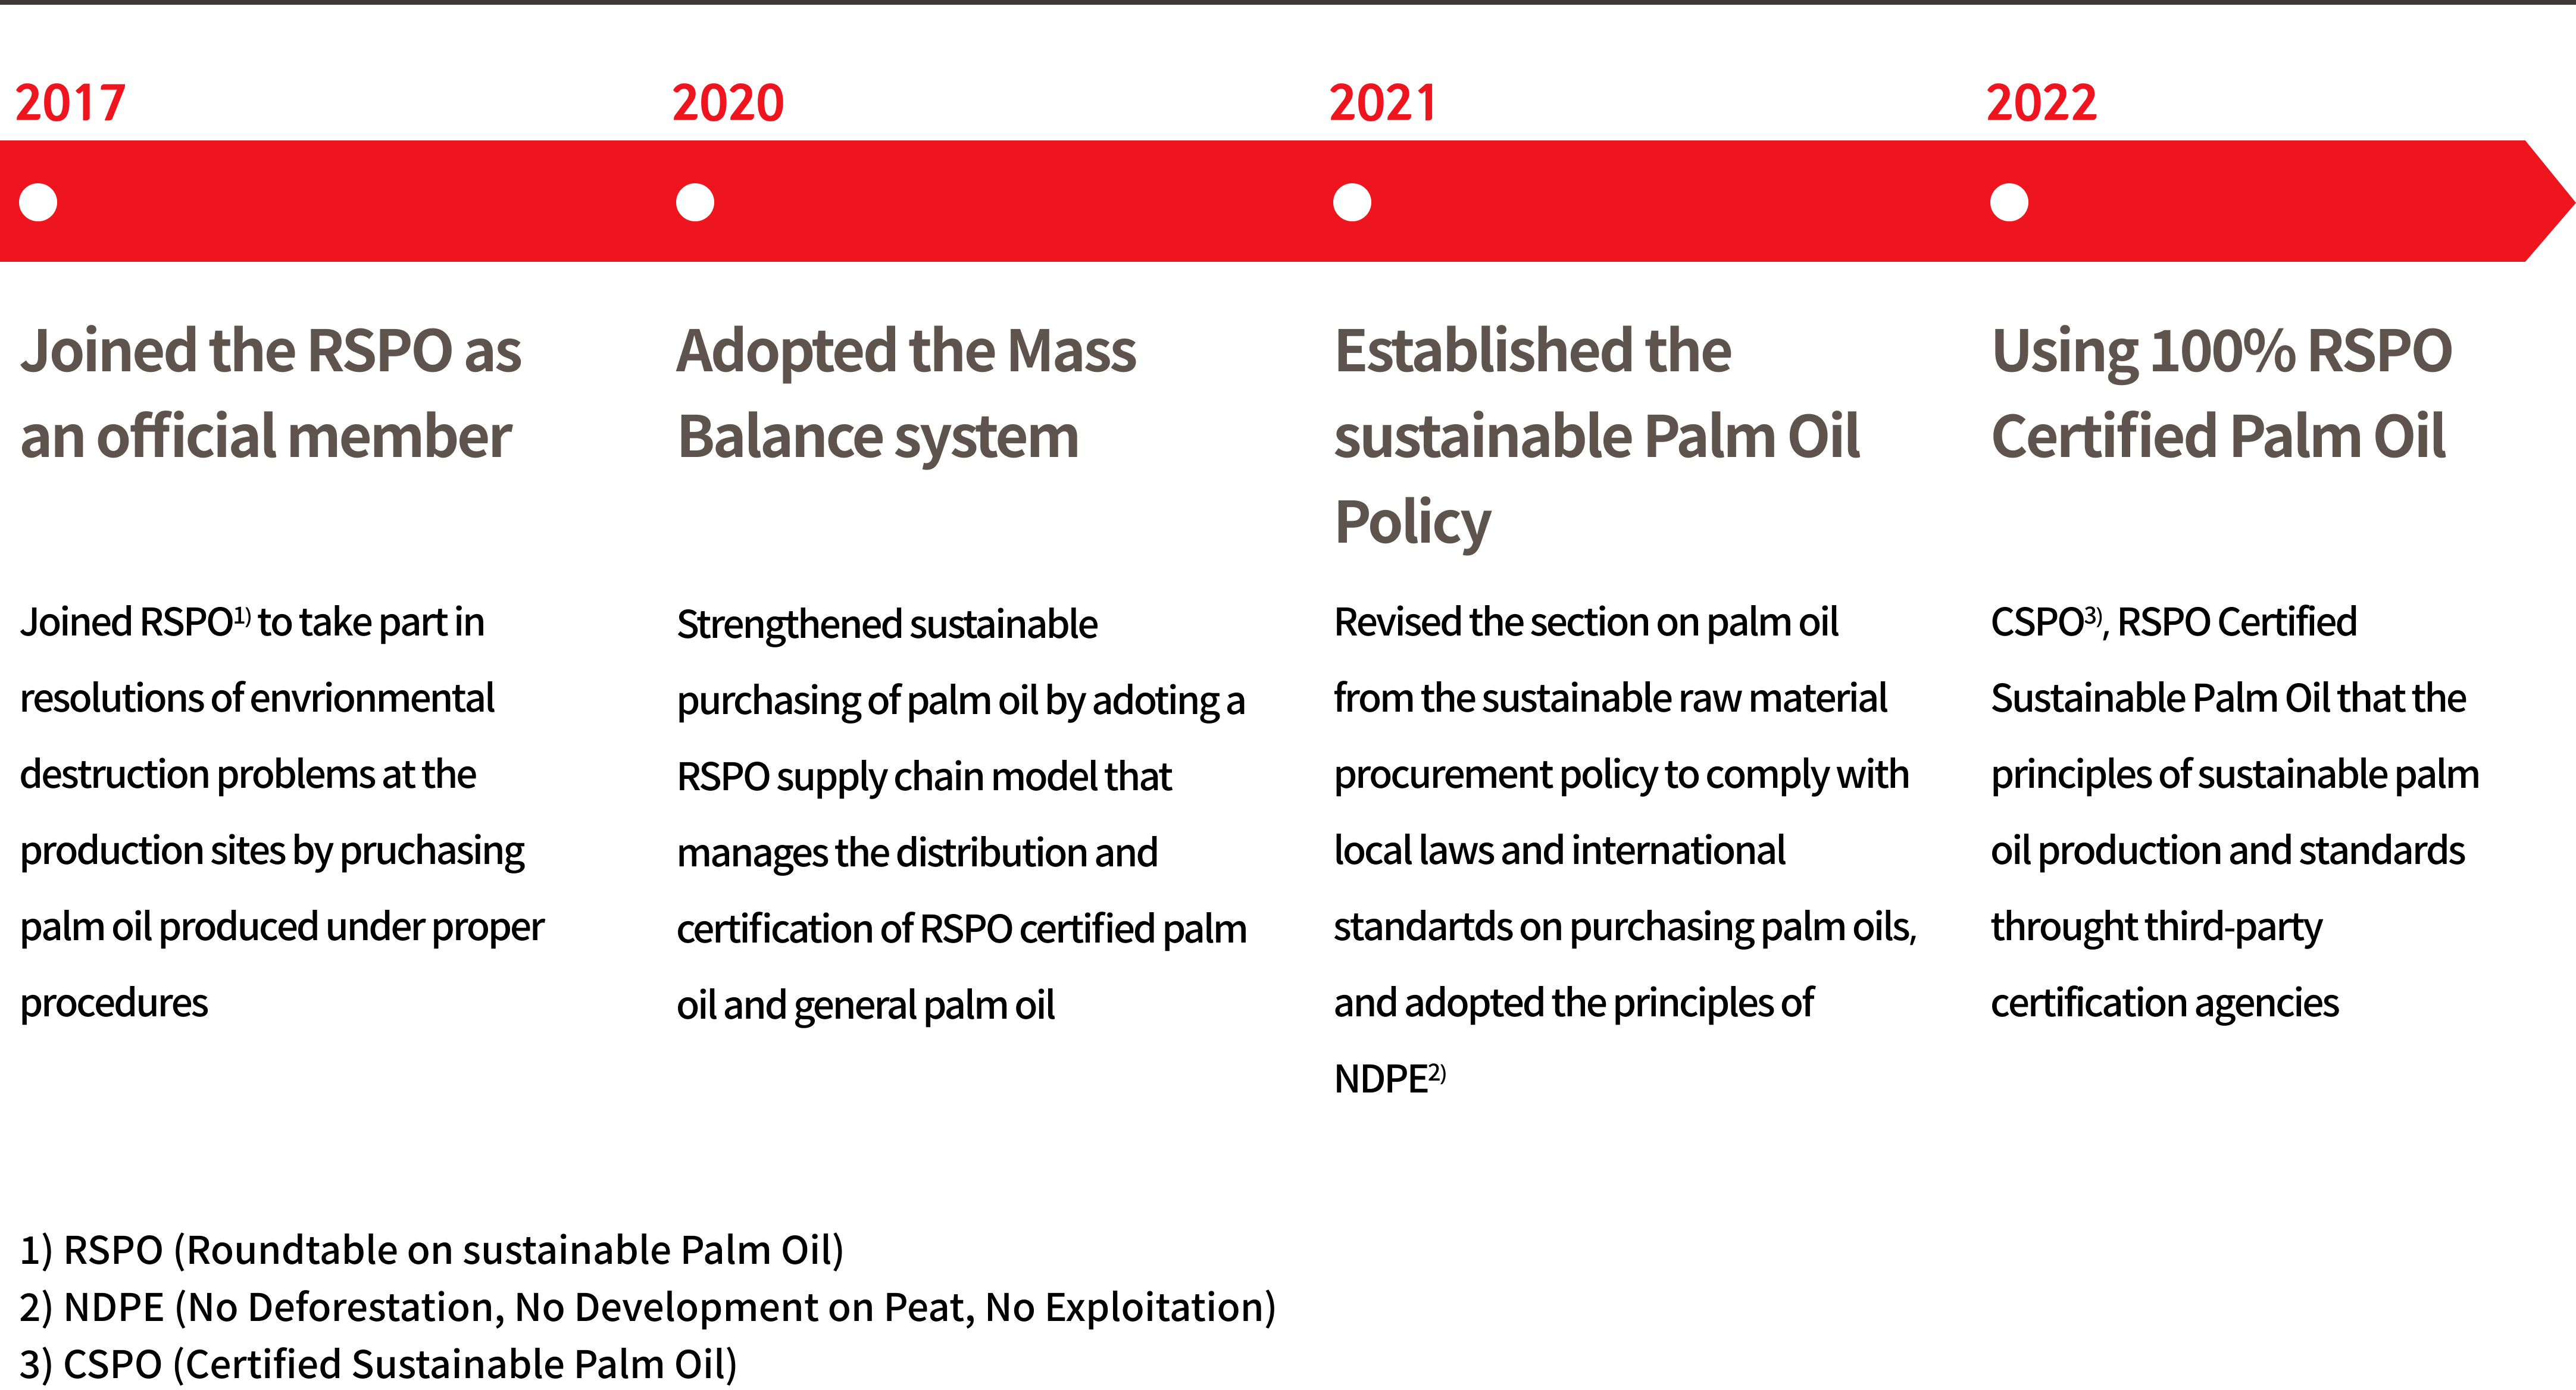 Sustainable Palm Oil Policy